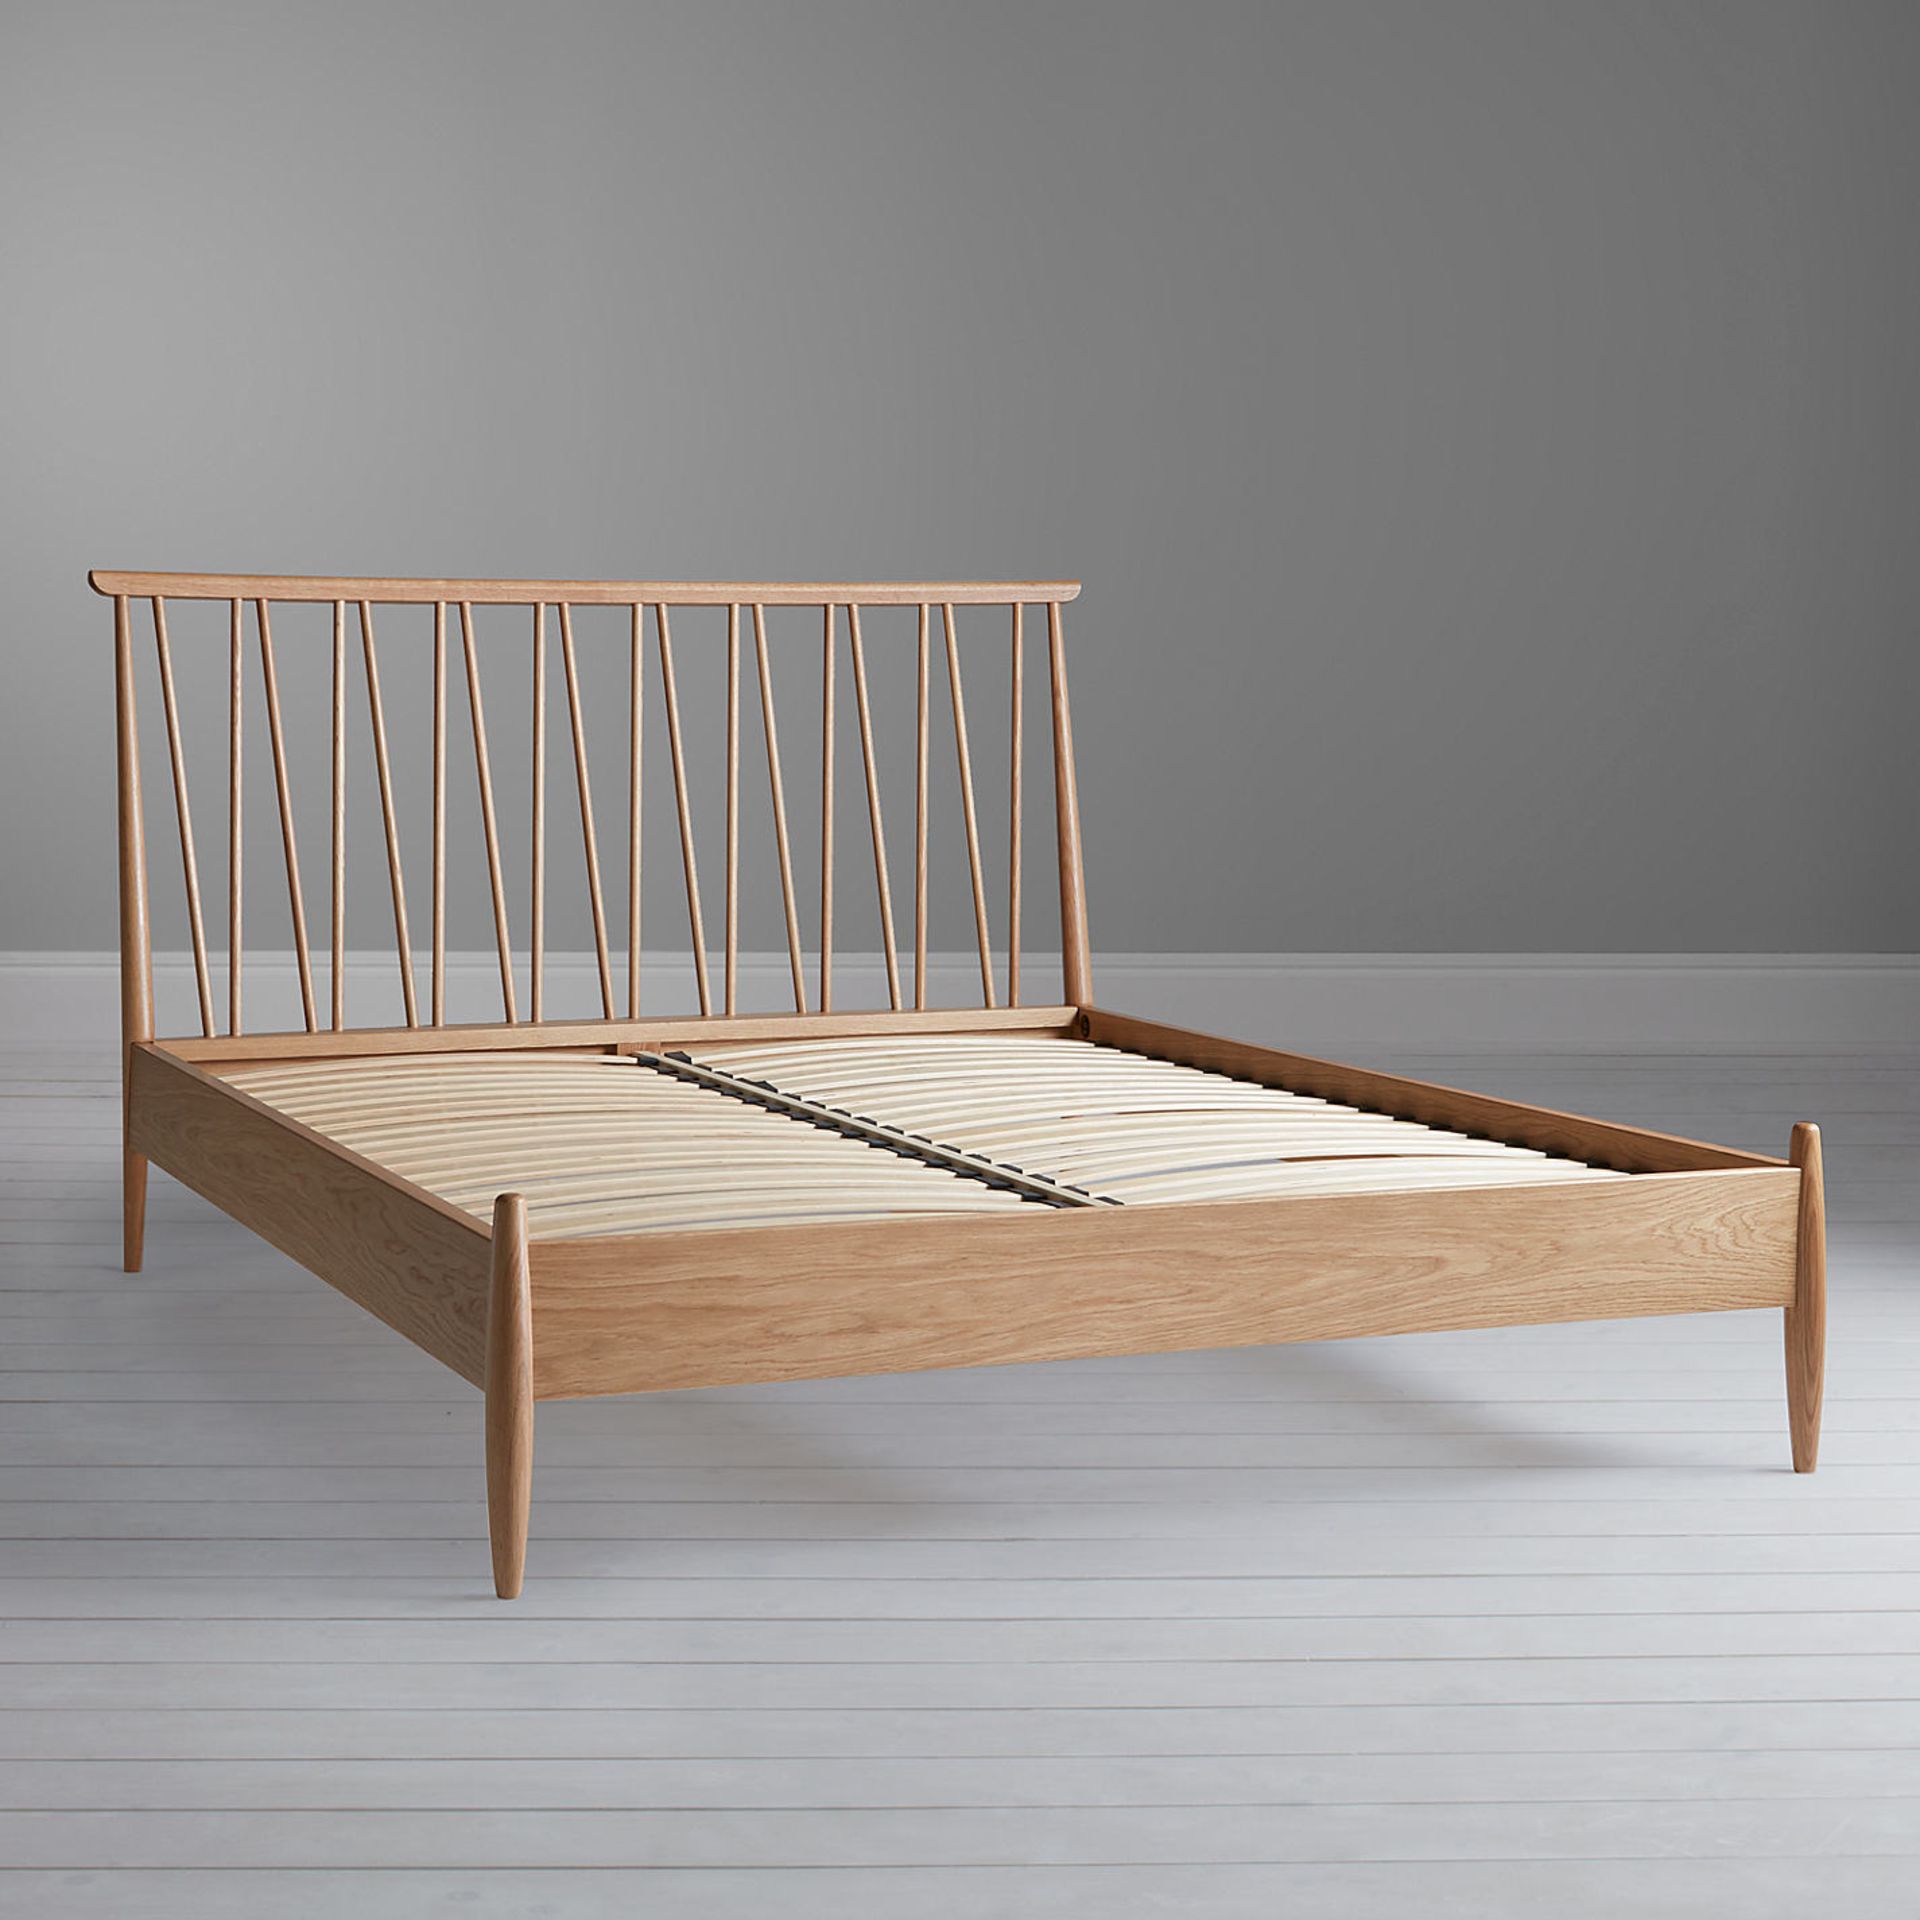 1 x 150CM AIRCOL SHALSTONE BED STEAD RRP £1000 (36131) (THIS ITEM IS FLAT PACKED/VIEWING IS